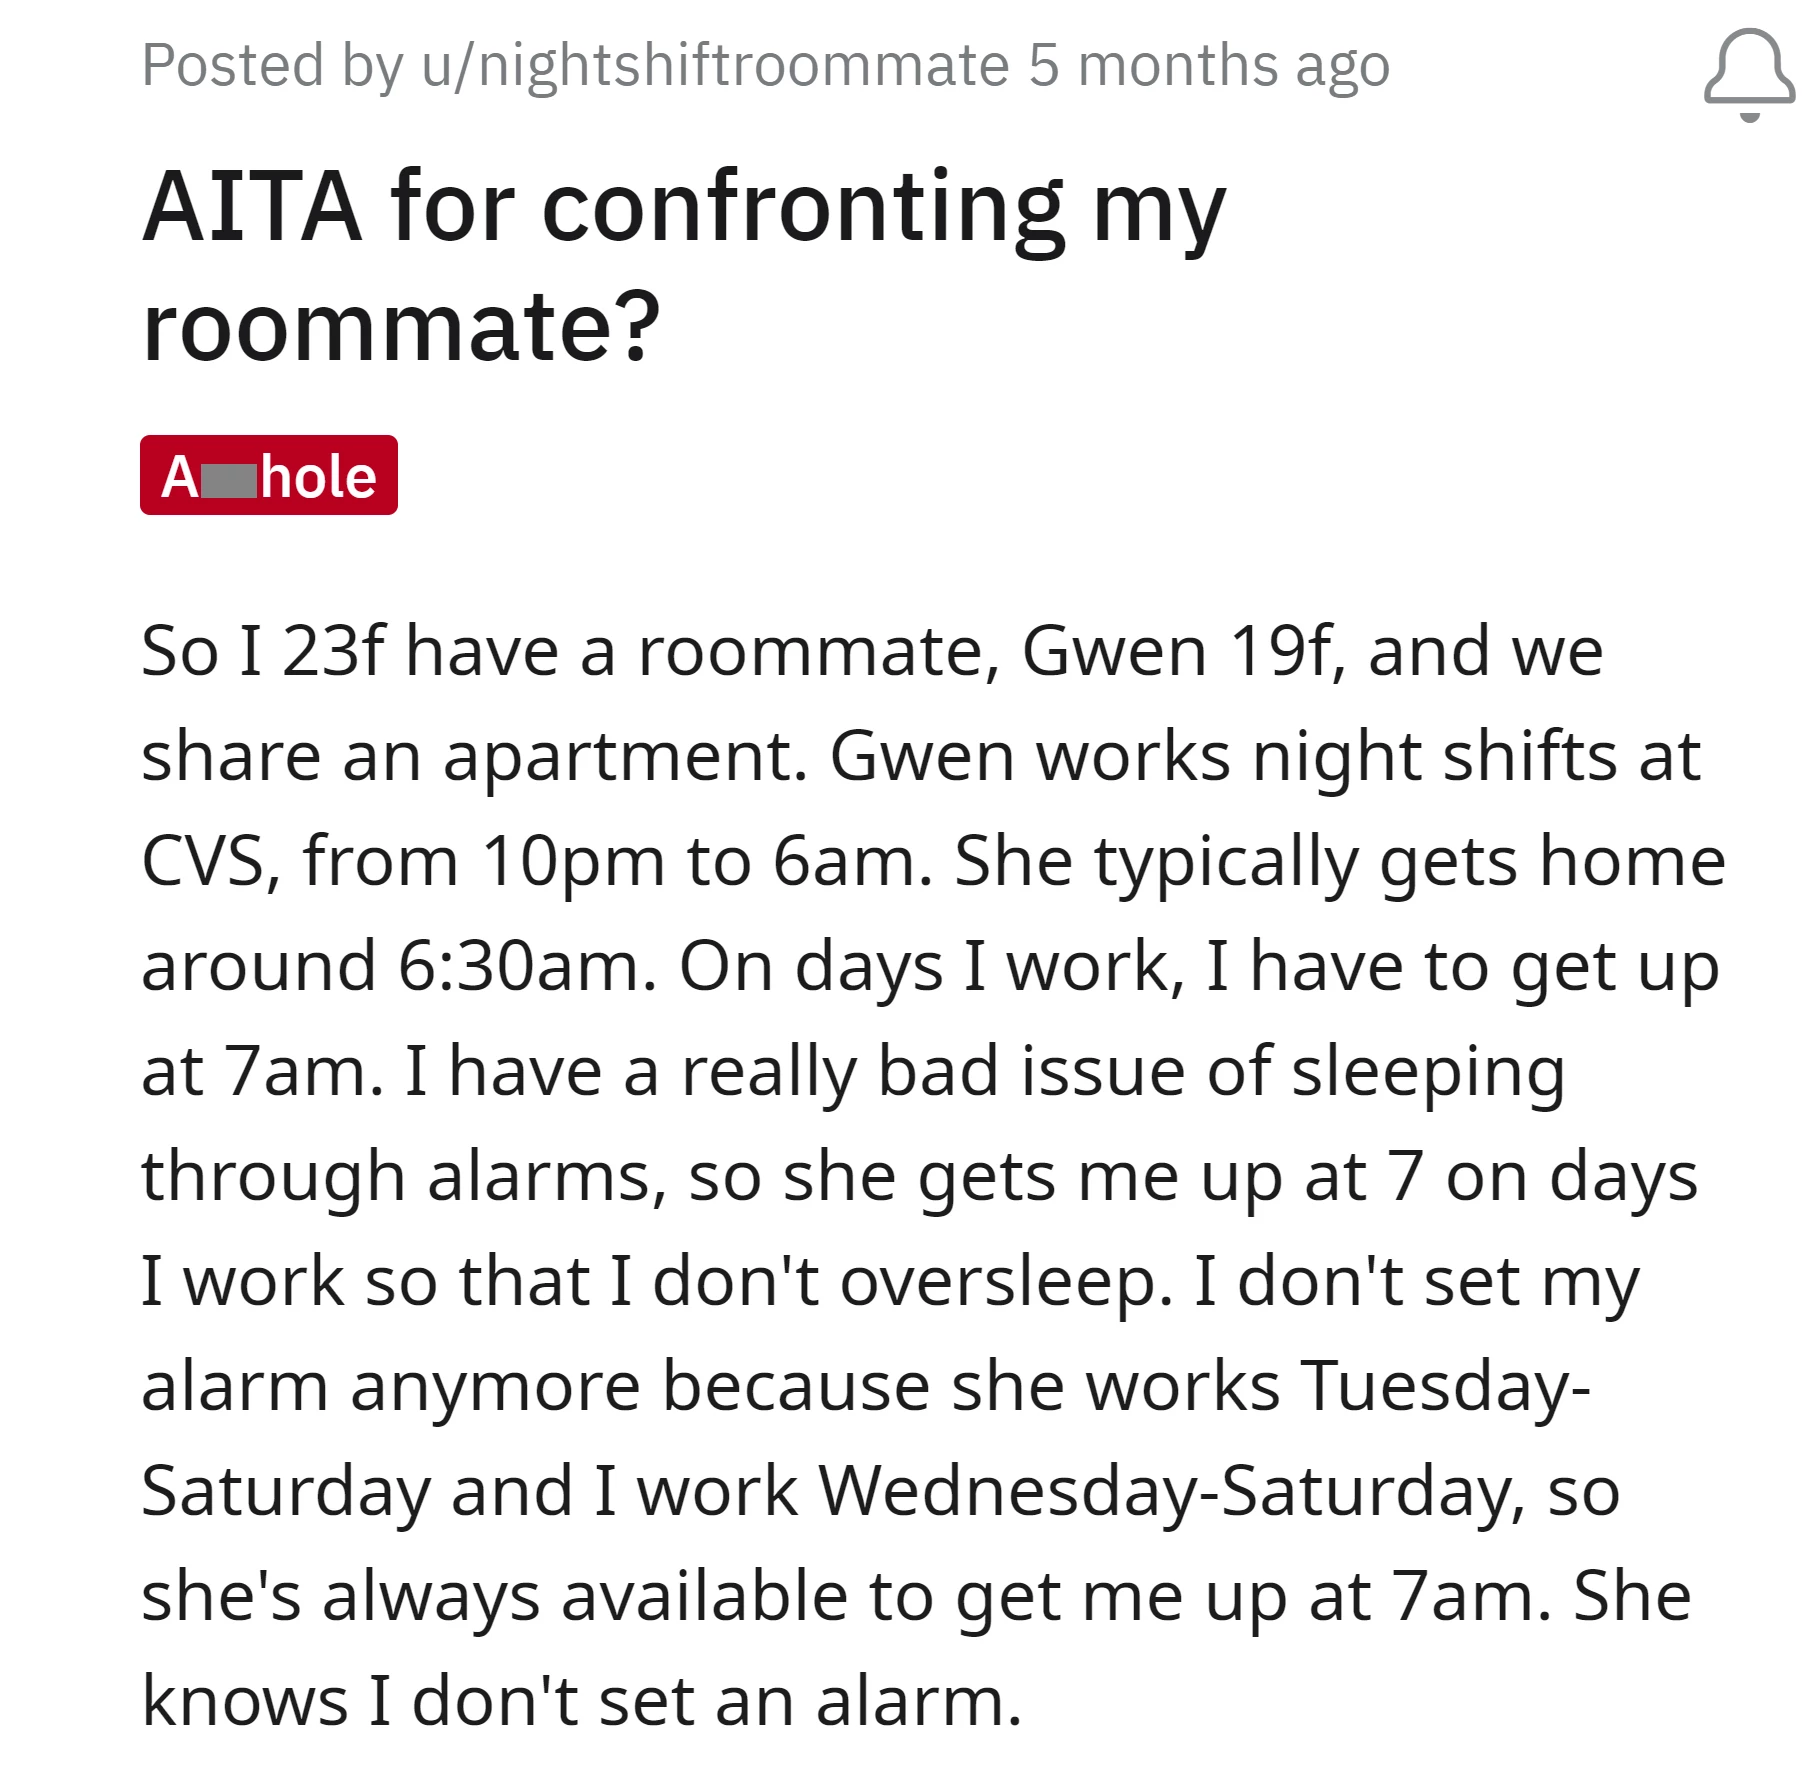 The OP has a bad habit of sleeling, so she has her roommate wake her up at 7 am on workdays